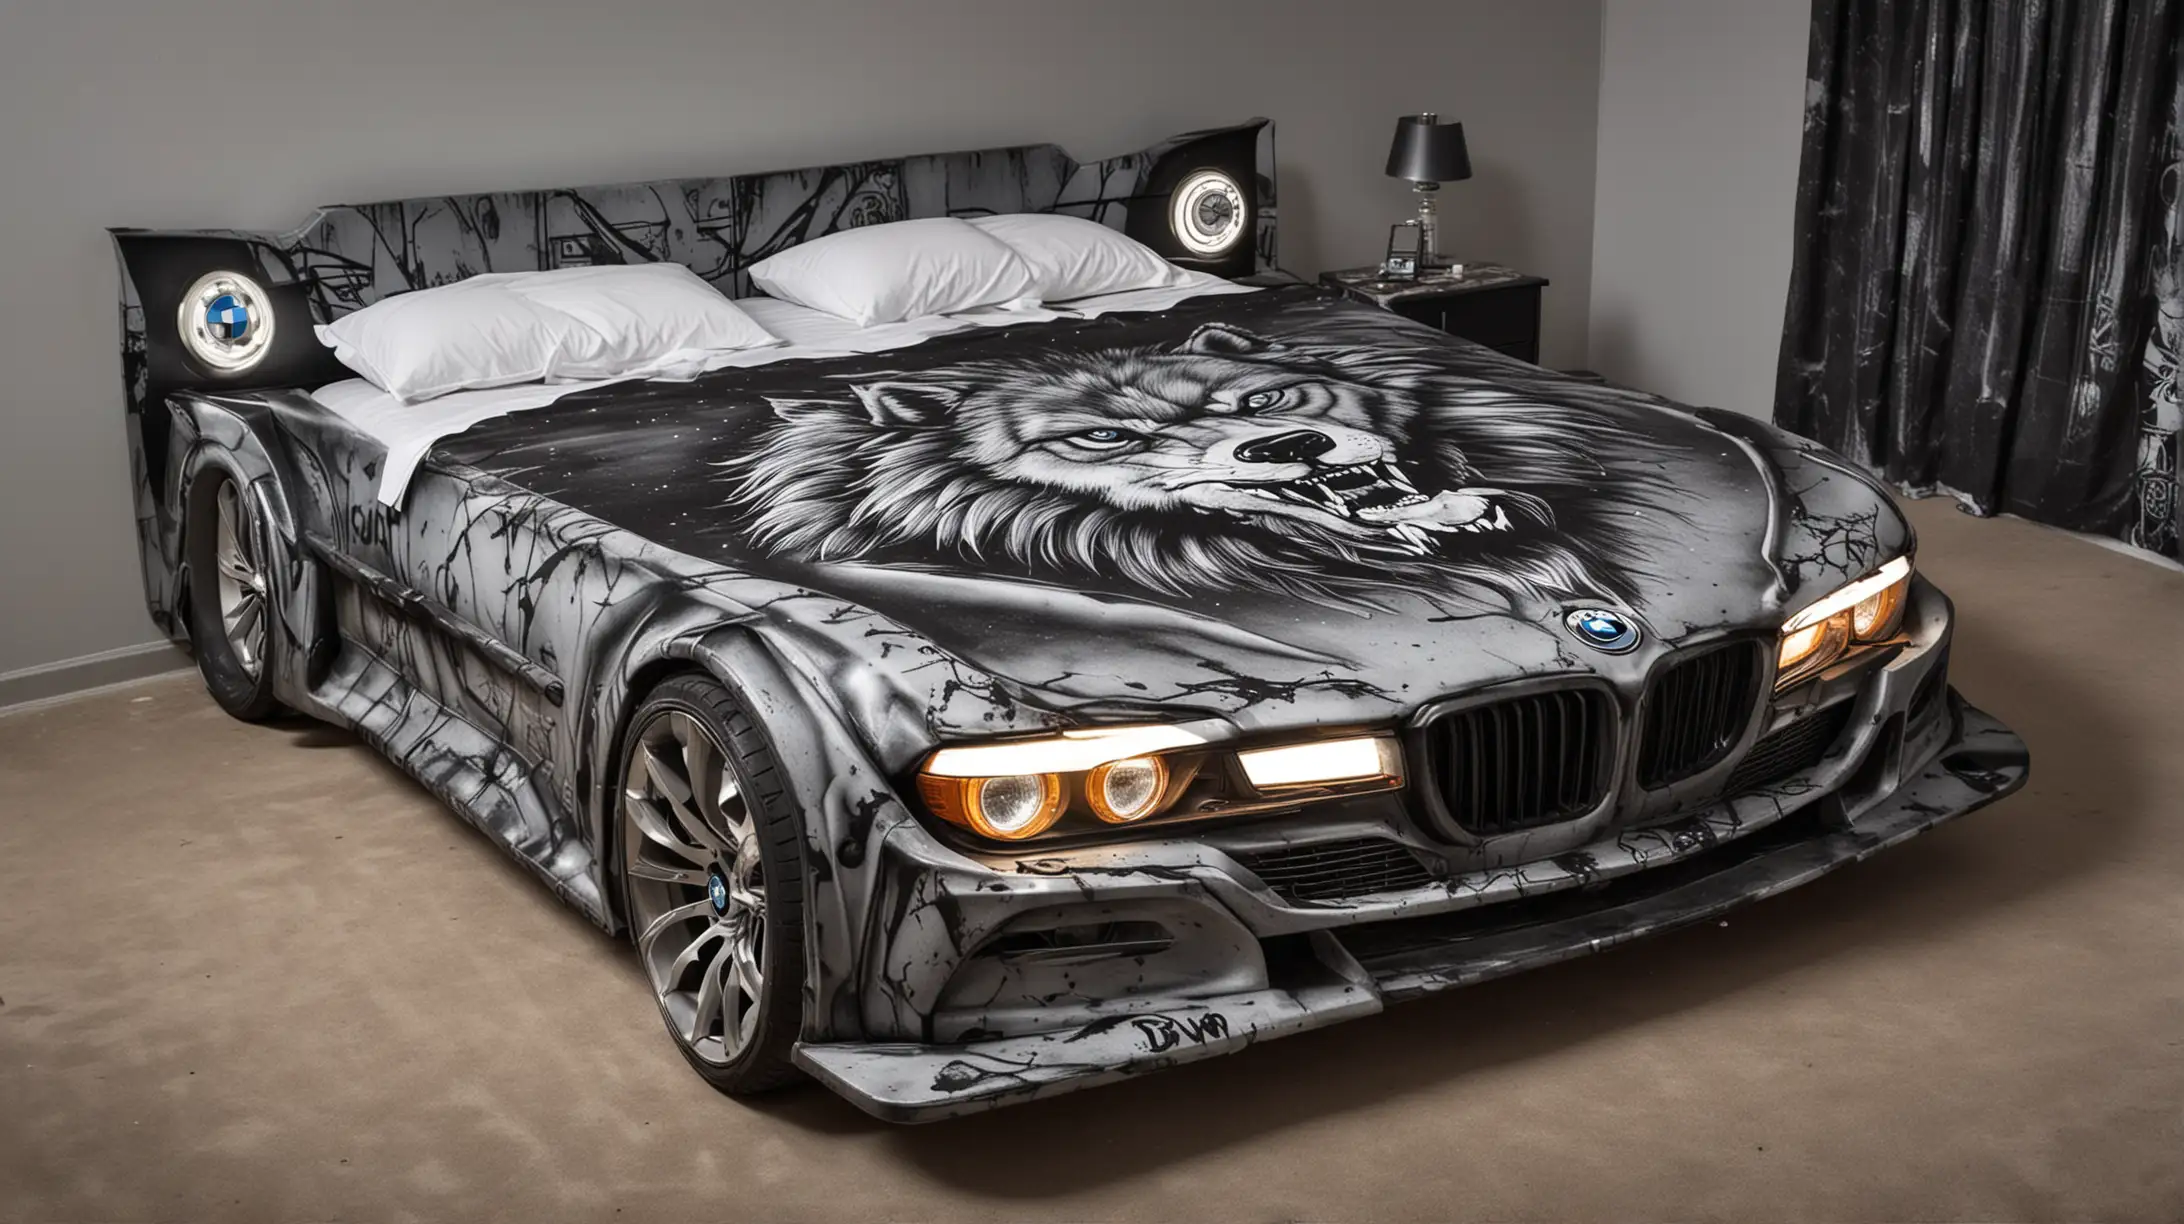 BMW CarShaped Double Bed with Evil Wolf Graffiti